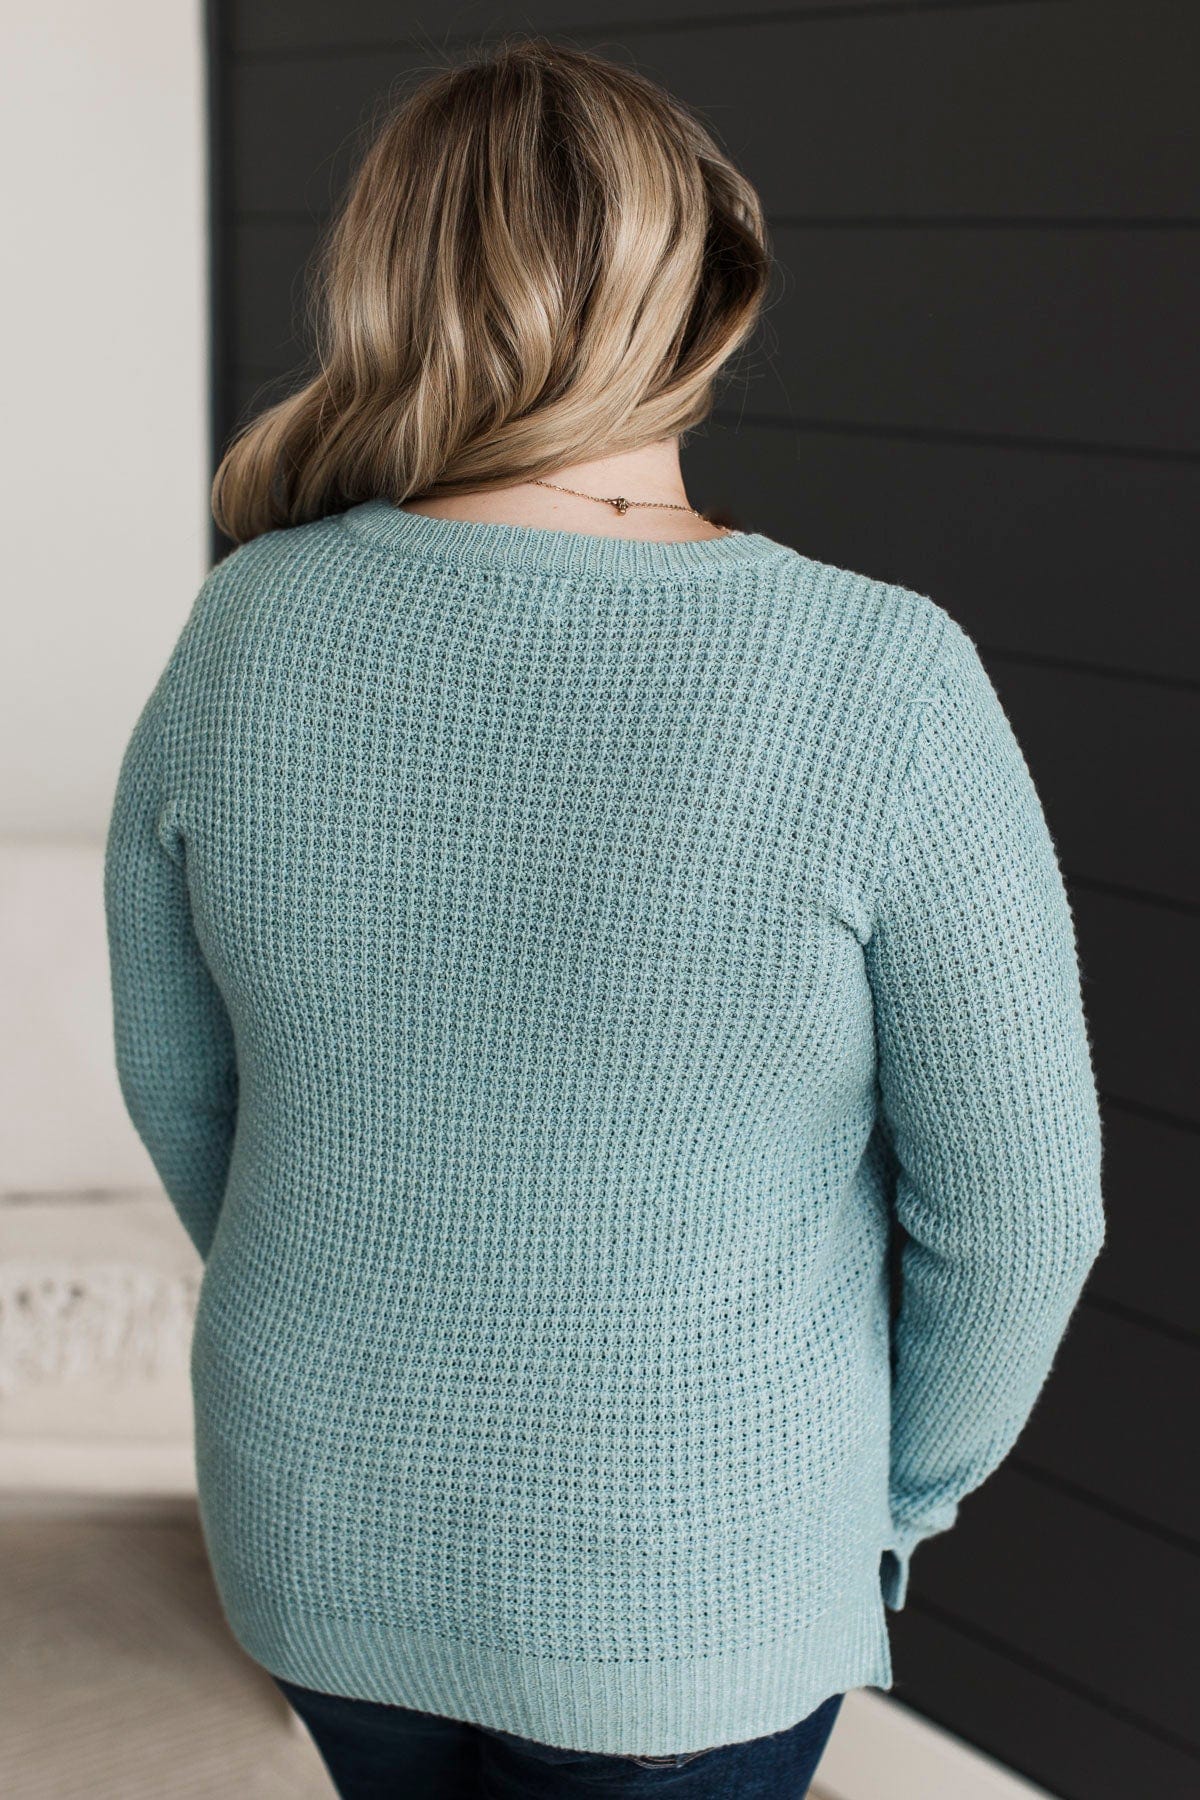 Absolutely Amazing Knit Sweater- Light Blue